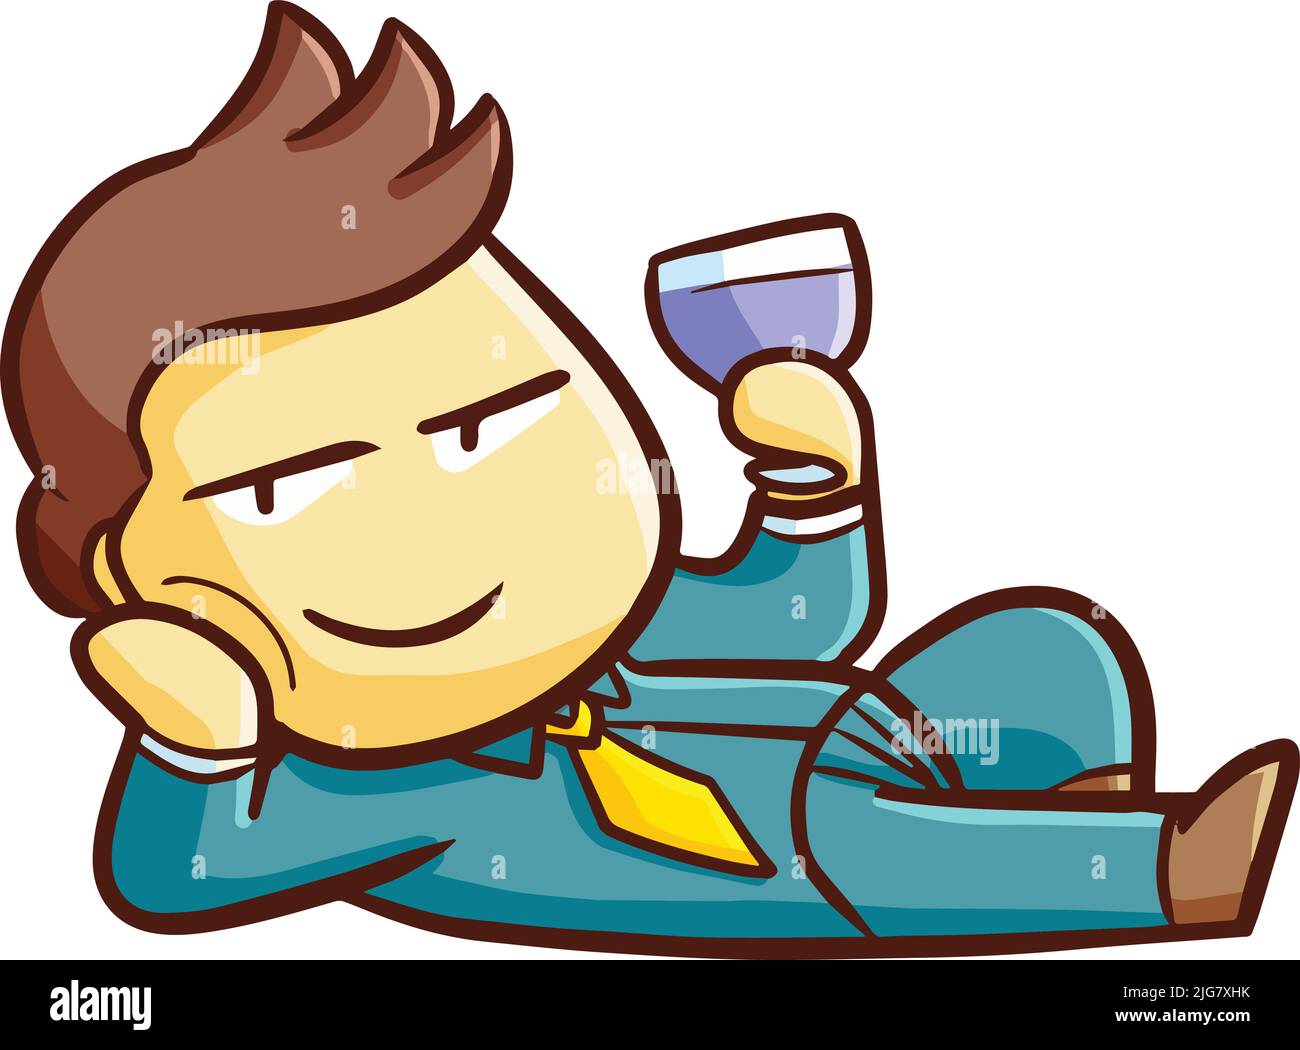 A simple clip art of a cartoon character drinking wine Stock Vector